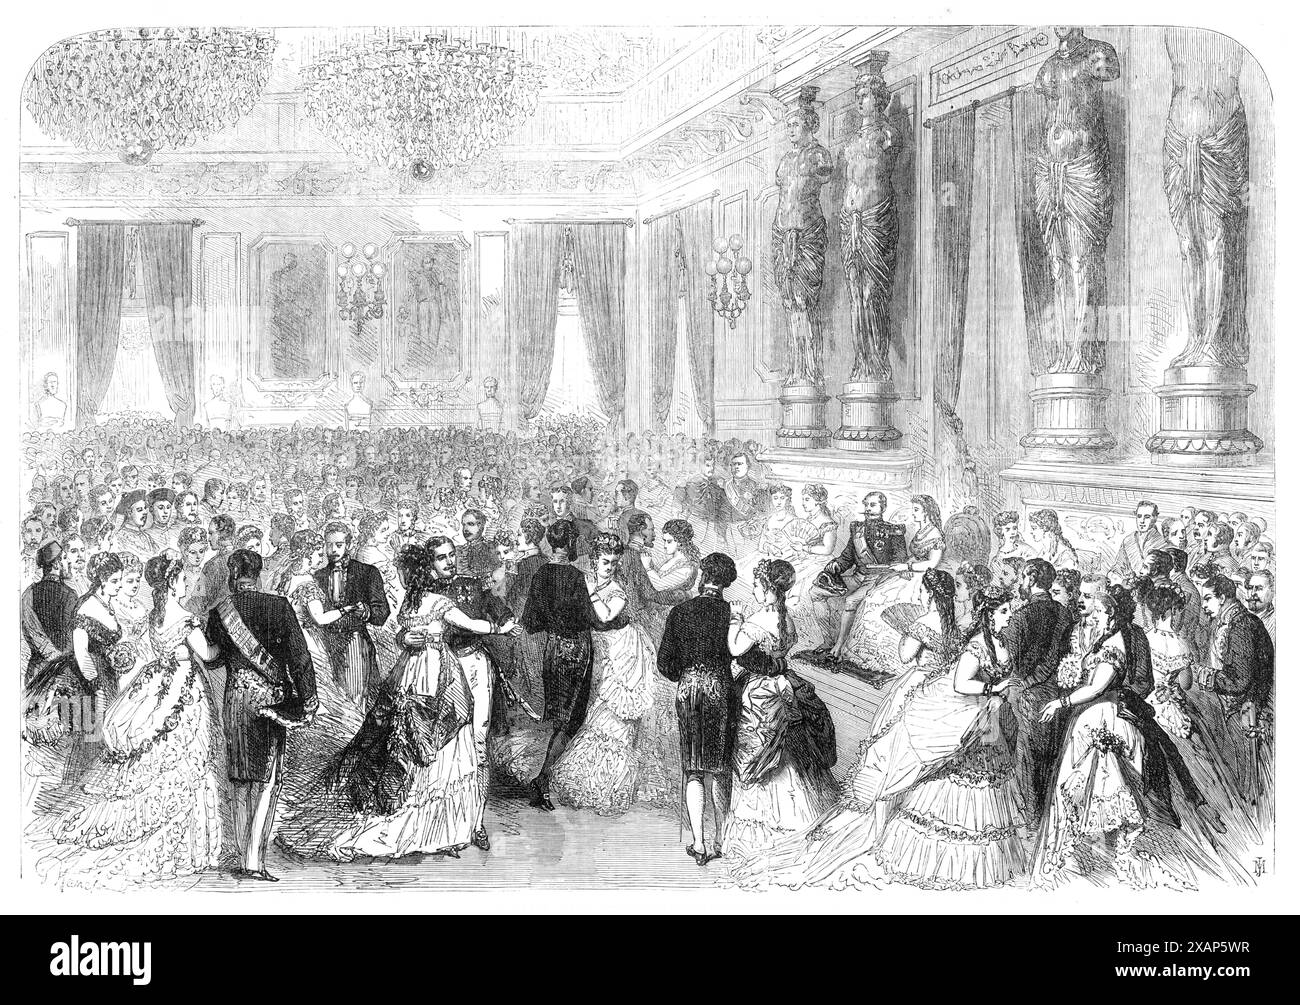 State Ball at the Tuileries [Palace, in Paris]: presentations to the Emperor and Empress before the Ball, 1869. 'The ball...takes place in the Salle des Marechaux, a vast saloon...This hall is the largest in the Tuileries ; but, despite its size, the crowd is frequently so great that dancing becomes an impossibility, though numerous chamberlains in scarlet uniforms, and ushers with their necks encircled by chains of massy silver, are continually doing their utmost to maintain a clear space...The quadrille of honour, the persons taking part in which are always designated by the Emperor, is usua Stock Photo